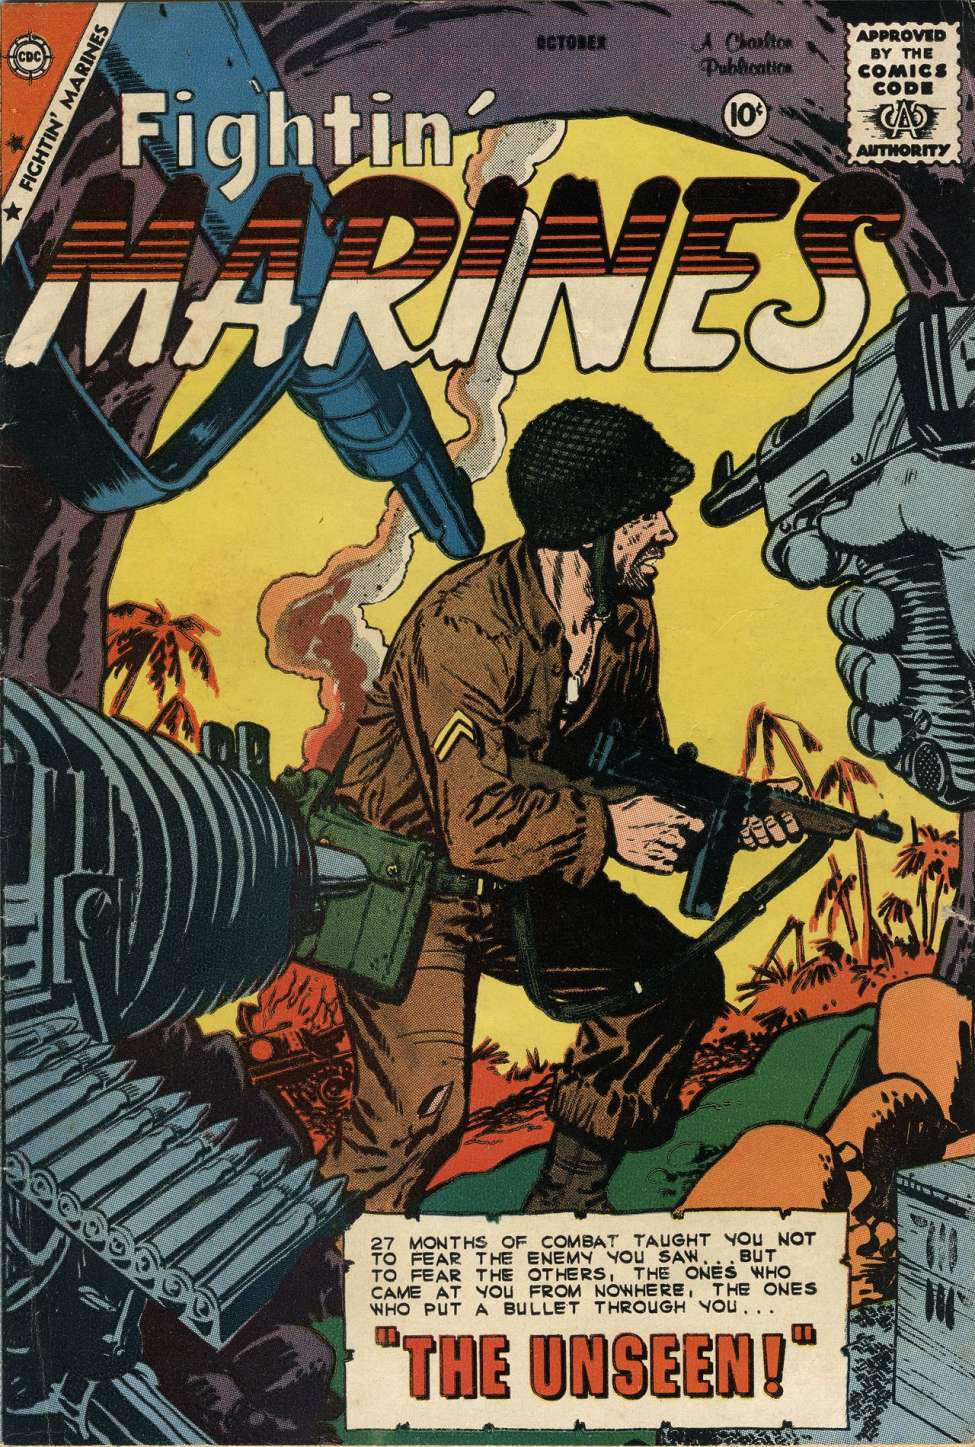 Comic Book Cover For Fightin' Marines 32 - Version 2